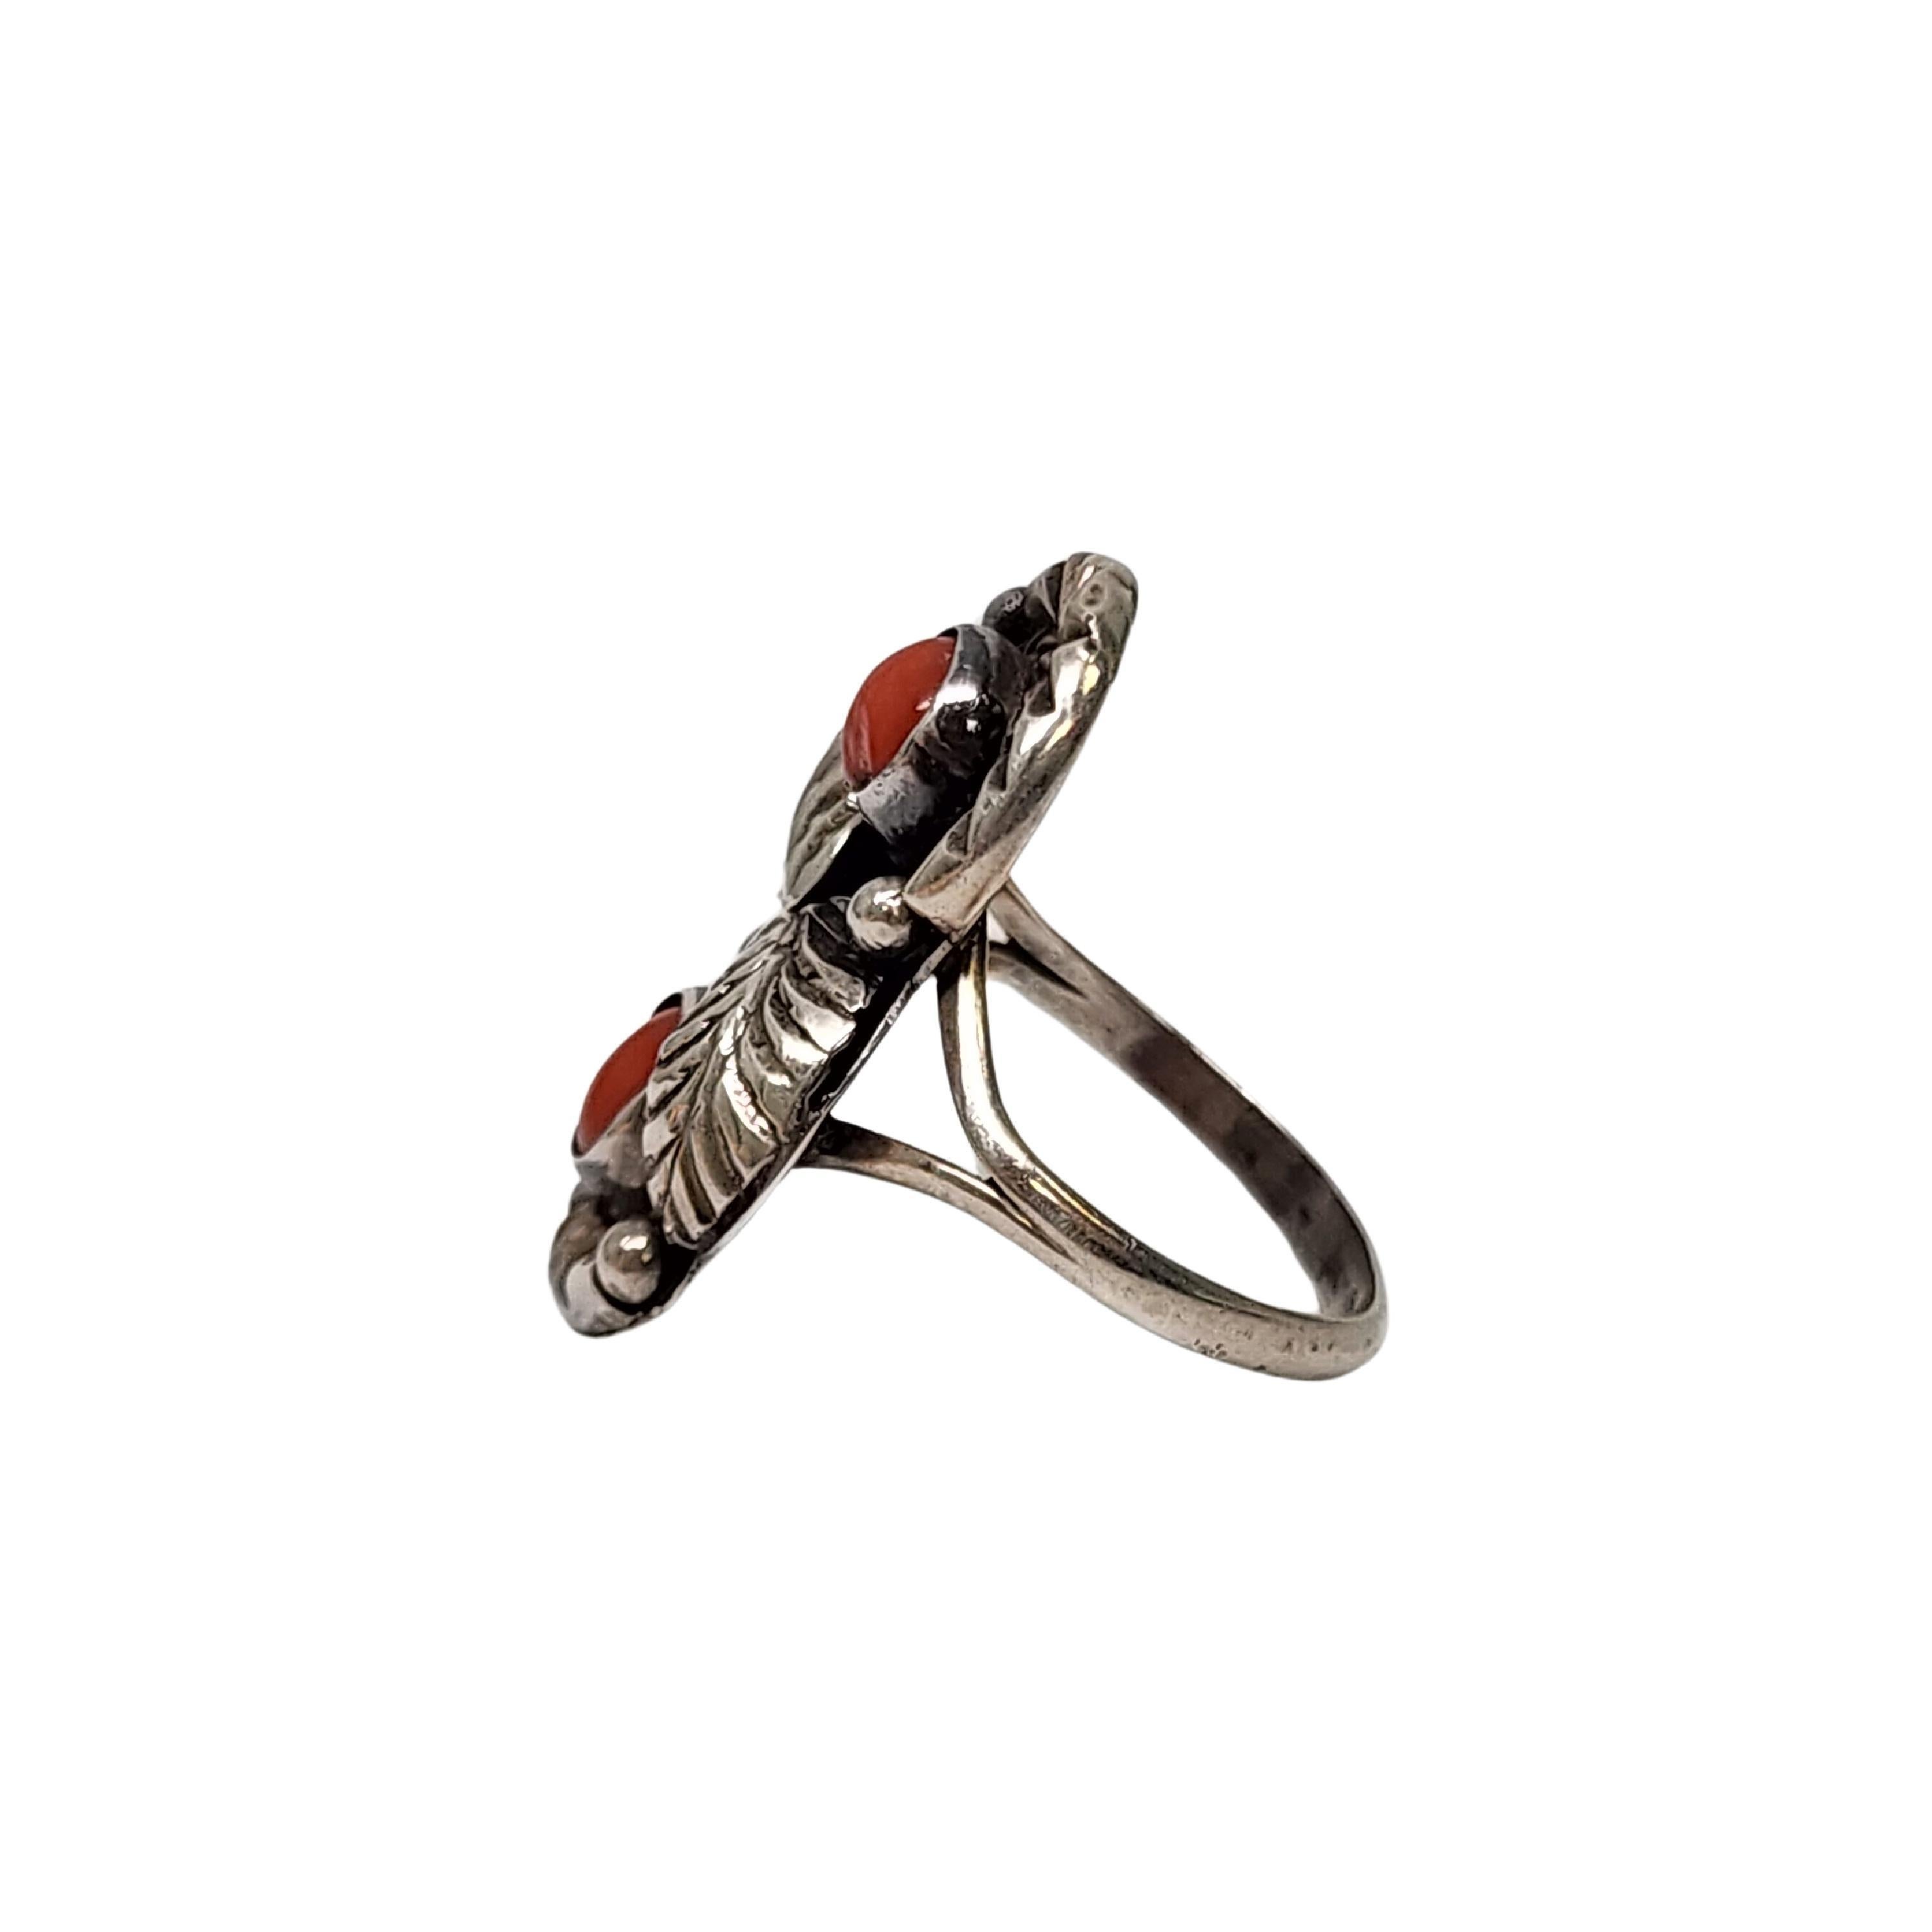 Sterling silver and coral ring by Native American artisan Tom Willetto.

Size 4 1/2

This sterling silver ring features 2 red coral stone bezel set with feather and etched accents.

Weighs approx 4.2g, 2.7dwt

1